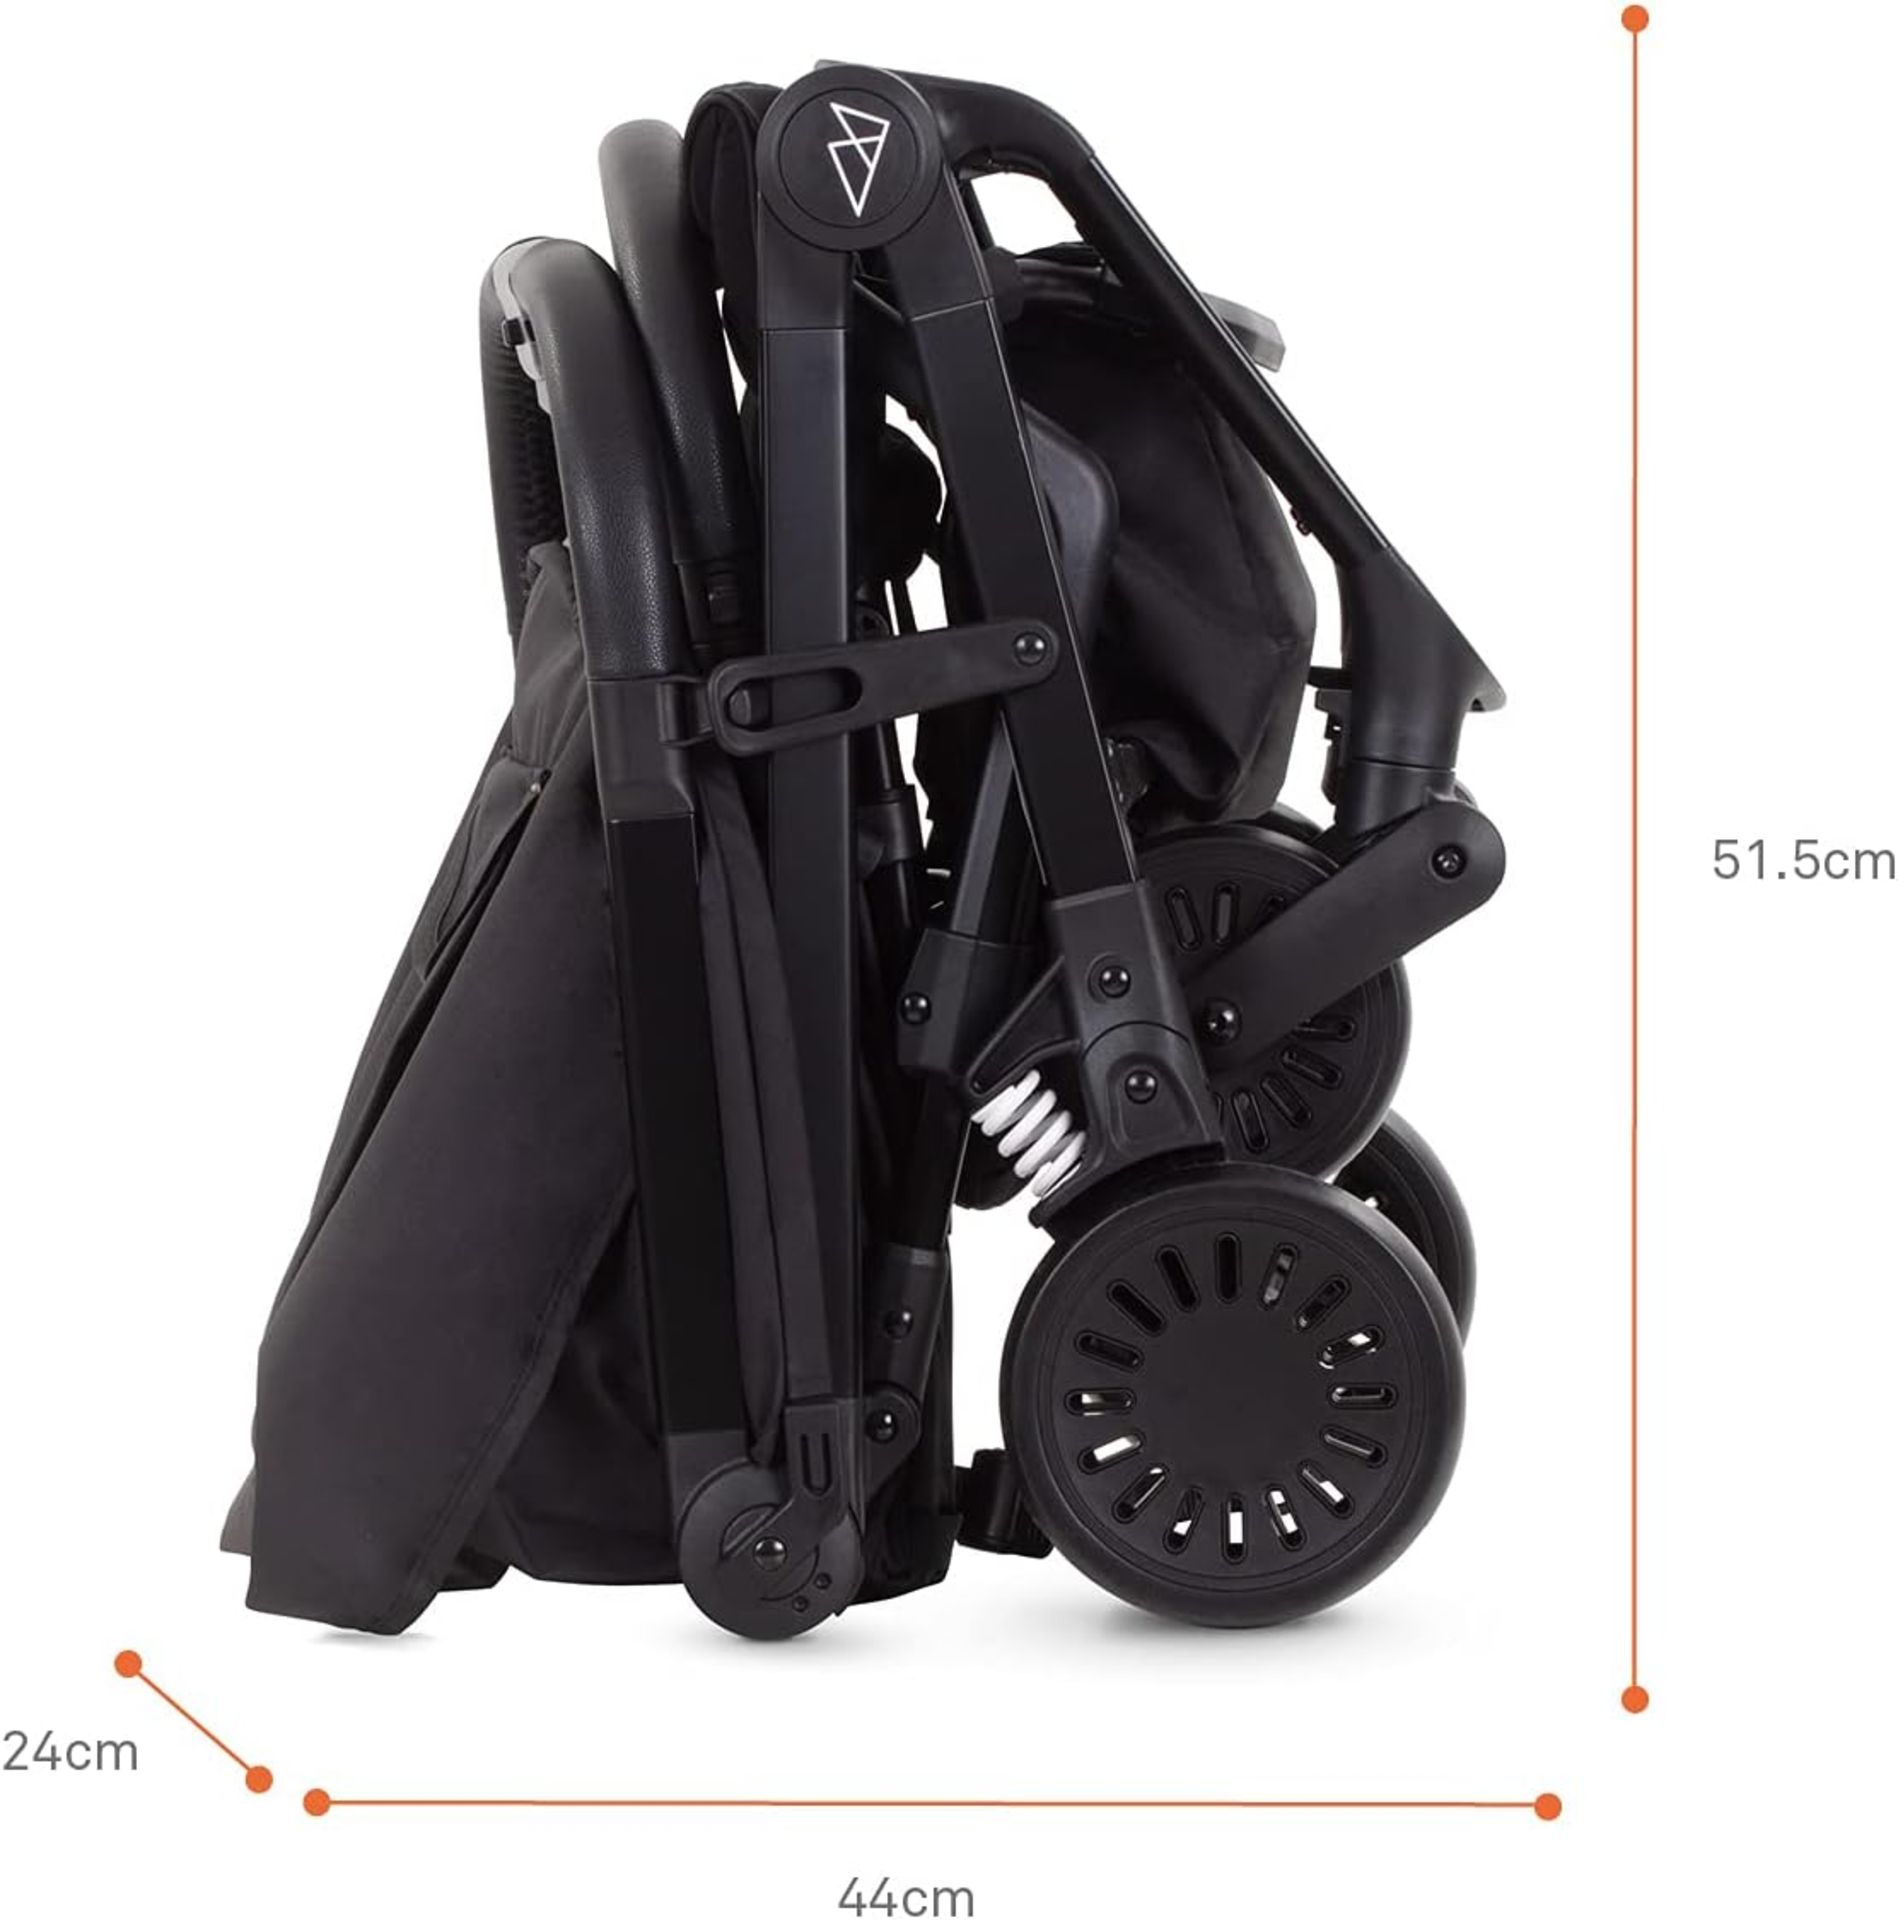 New & Boxed MICRALITE ProFold By Silver Cross Lightweight Travel Stroller with Compact Fold, - Image 3 of 4